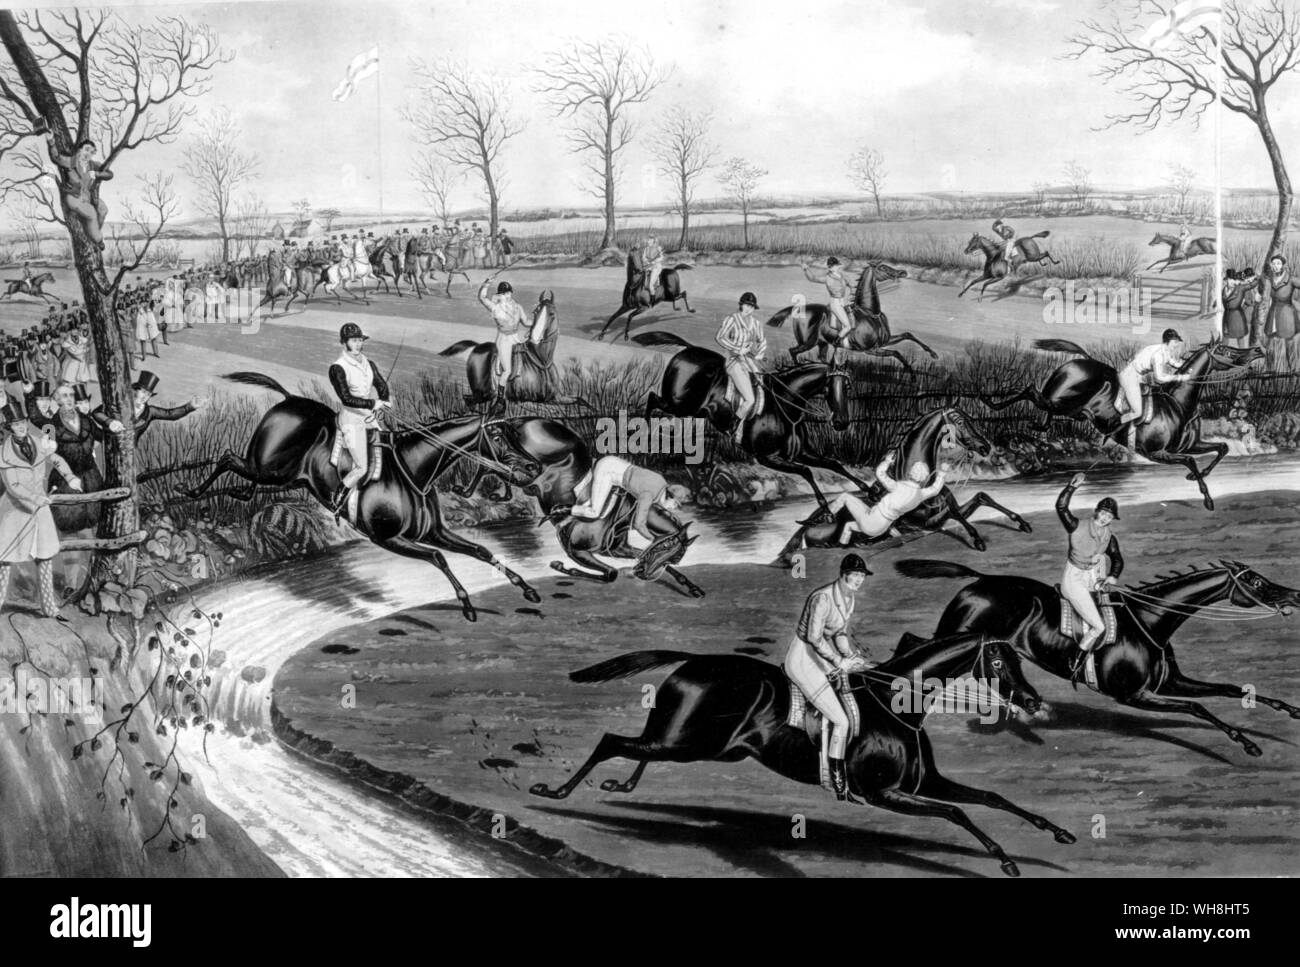 Liverpool Grand Steeplechase - This, in 1839, was the fourth Grand Steeplechase on the Aintree Course, but it is considered the first Grand National. They ran tiwce round a two-mile circuit, jumping 29 obstacles. Part of the course was plough. There were two brooks, each taken twice. The favourite was The Nun, Allen McDonough (stripes), the winner Lottery, Jem Mason (white blaze, behind him), and the second Seventy Four, Tom Oliver (extrme left, jumping). Captain Becher on Conrad had already fallen into the other brook for the second time. The History of Horse Racing by Roger Longrigg, page Stock Photo